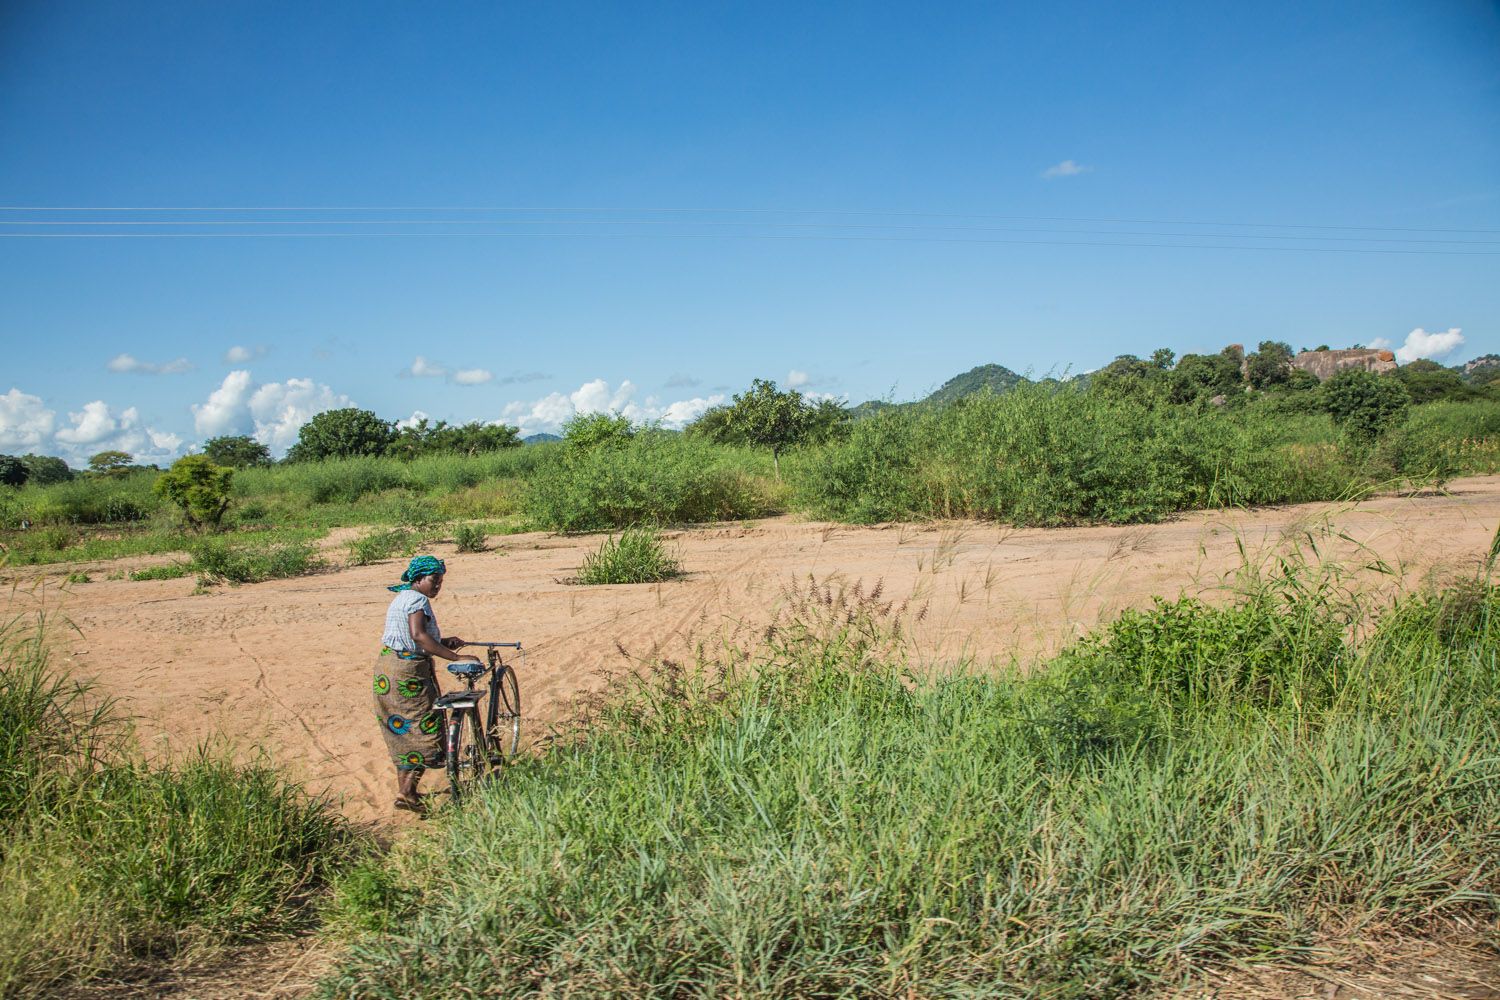 Due to high population growth, rapid deforestation and widespread soil erosion, Malawi's agriculture is particularly vulnerable to climate change. Image by Nathalie Bertrams. Malawi, 2017.